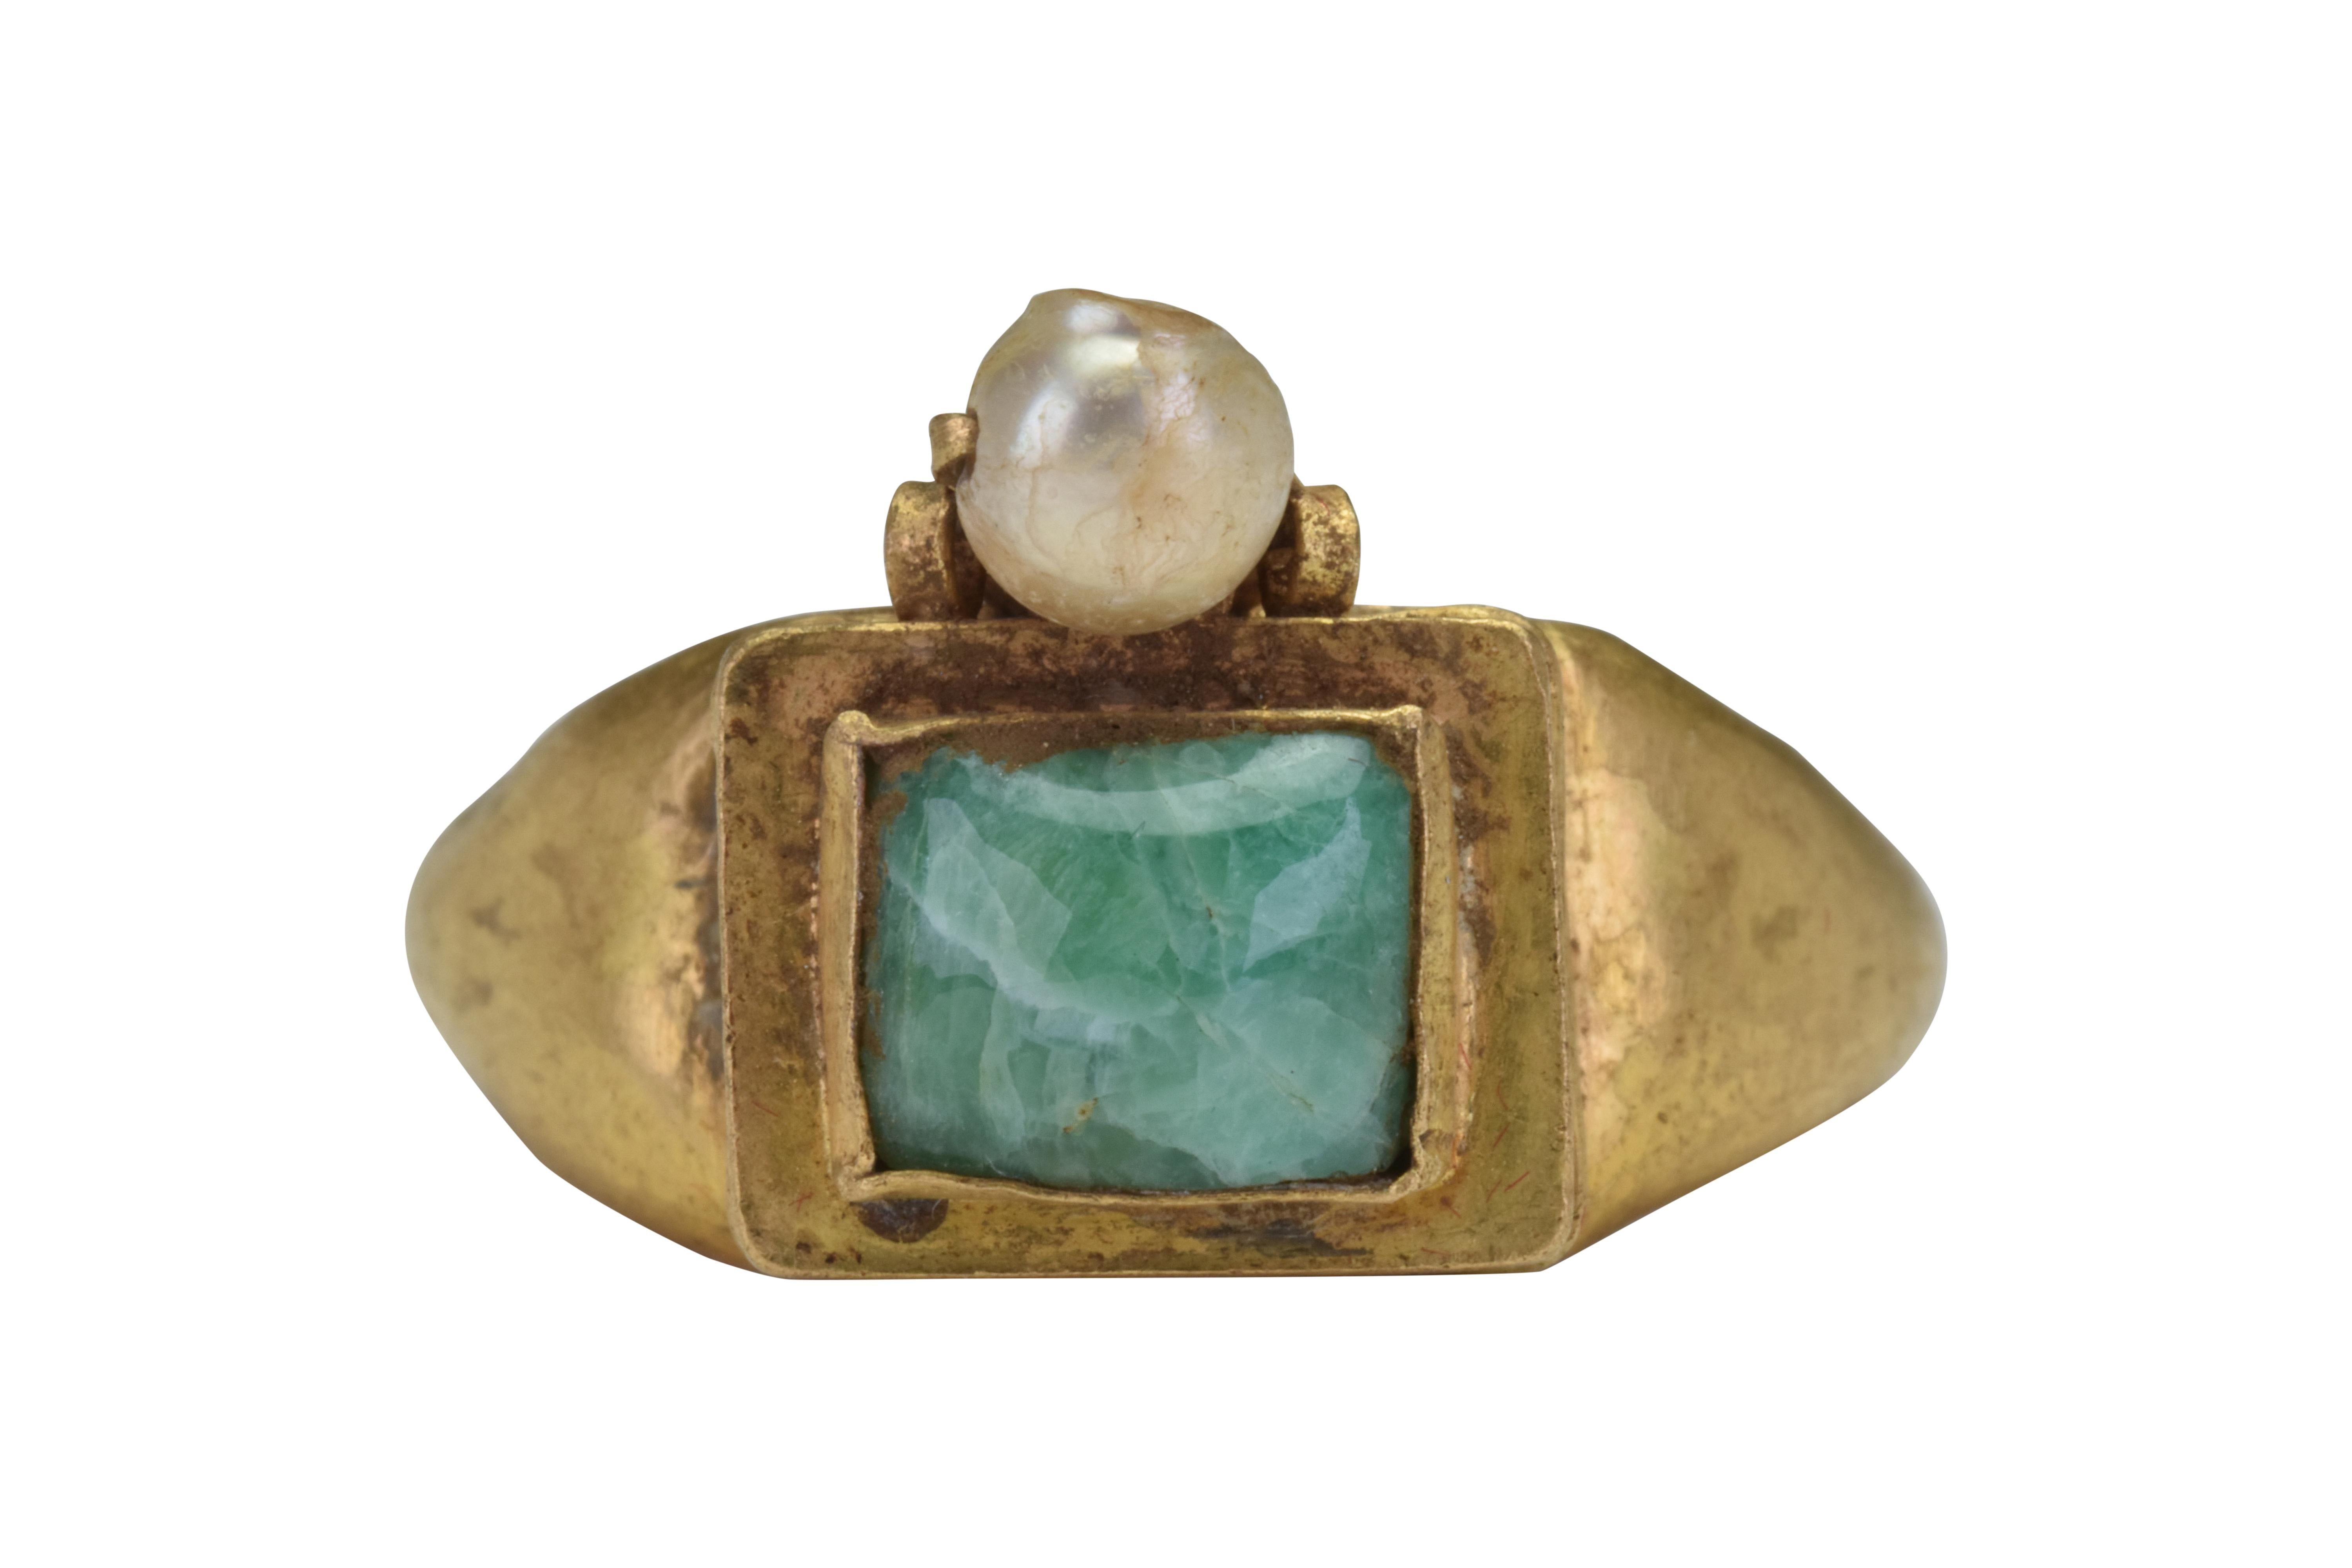 Byzantine Gold Ring with Emerald and Pearls 

Ca. 500-600 AD

A stunning gold finger ring of a smooth, round hoop with expanding shoulders to support a rectangular bezel with a banded base and tiered design embellished with an emerald cabochon.